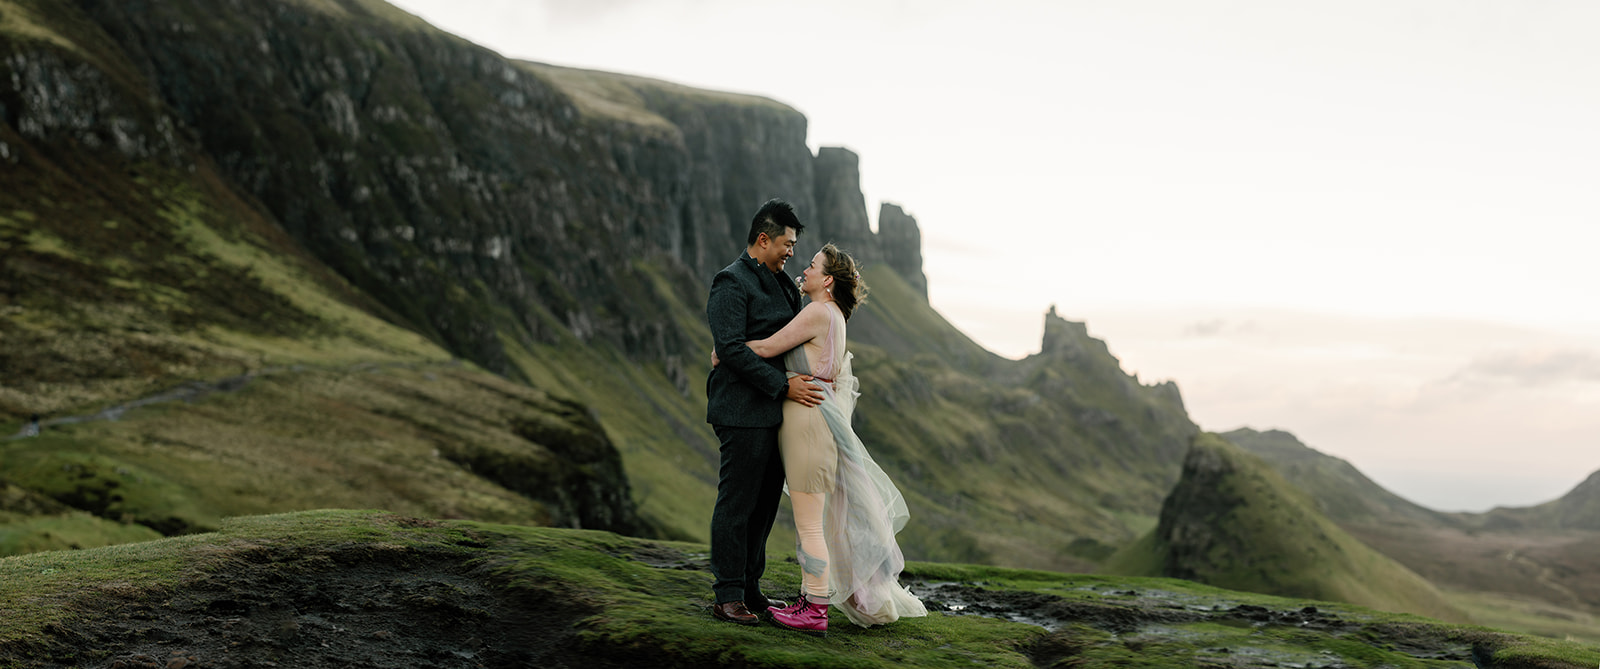 Mellie and Andrew shared a loving hug during their elopement at the Isle of Skye